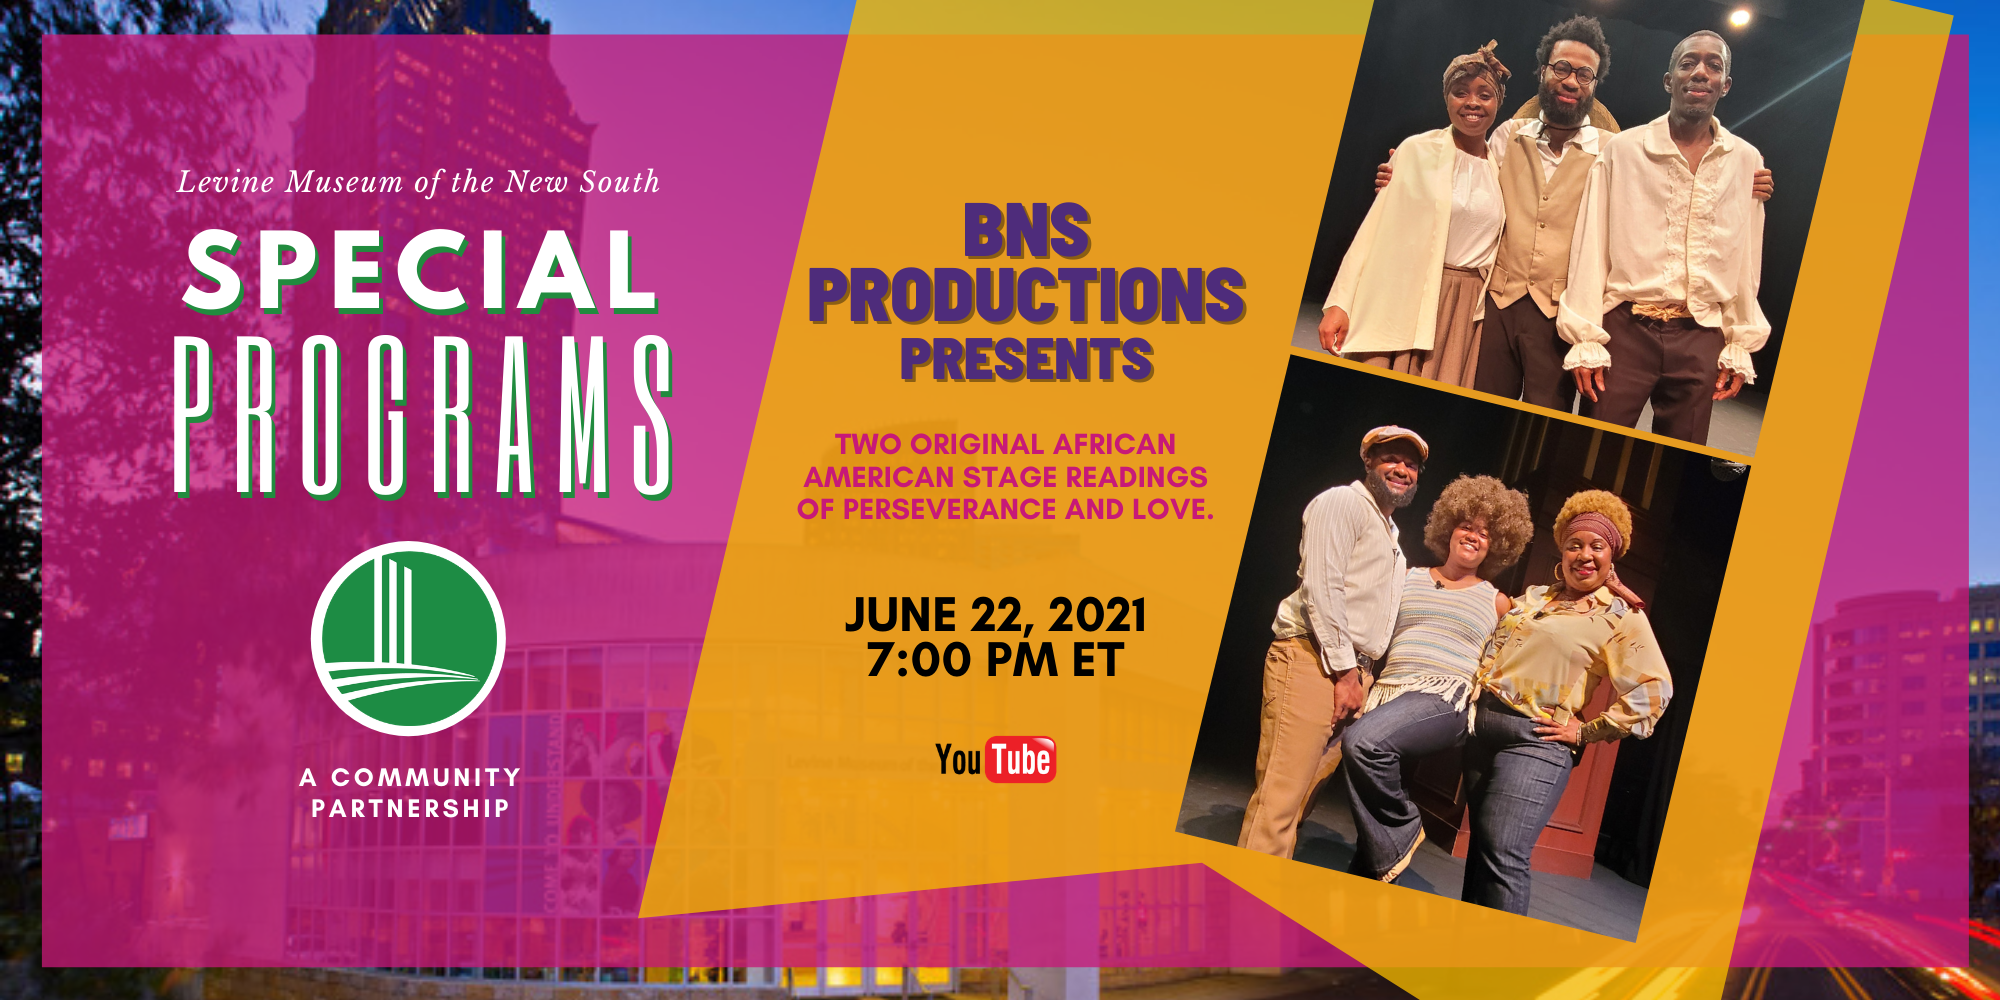 Levine Museum of the New South BNS Productions presents two original African American stage readings of perseverance and love Event Image